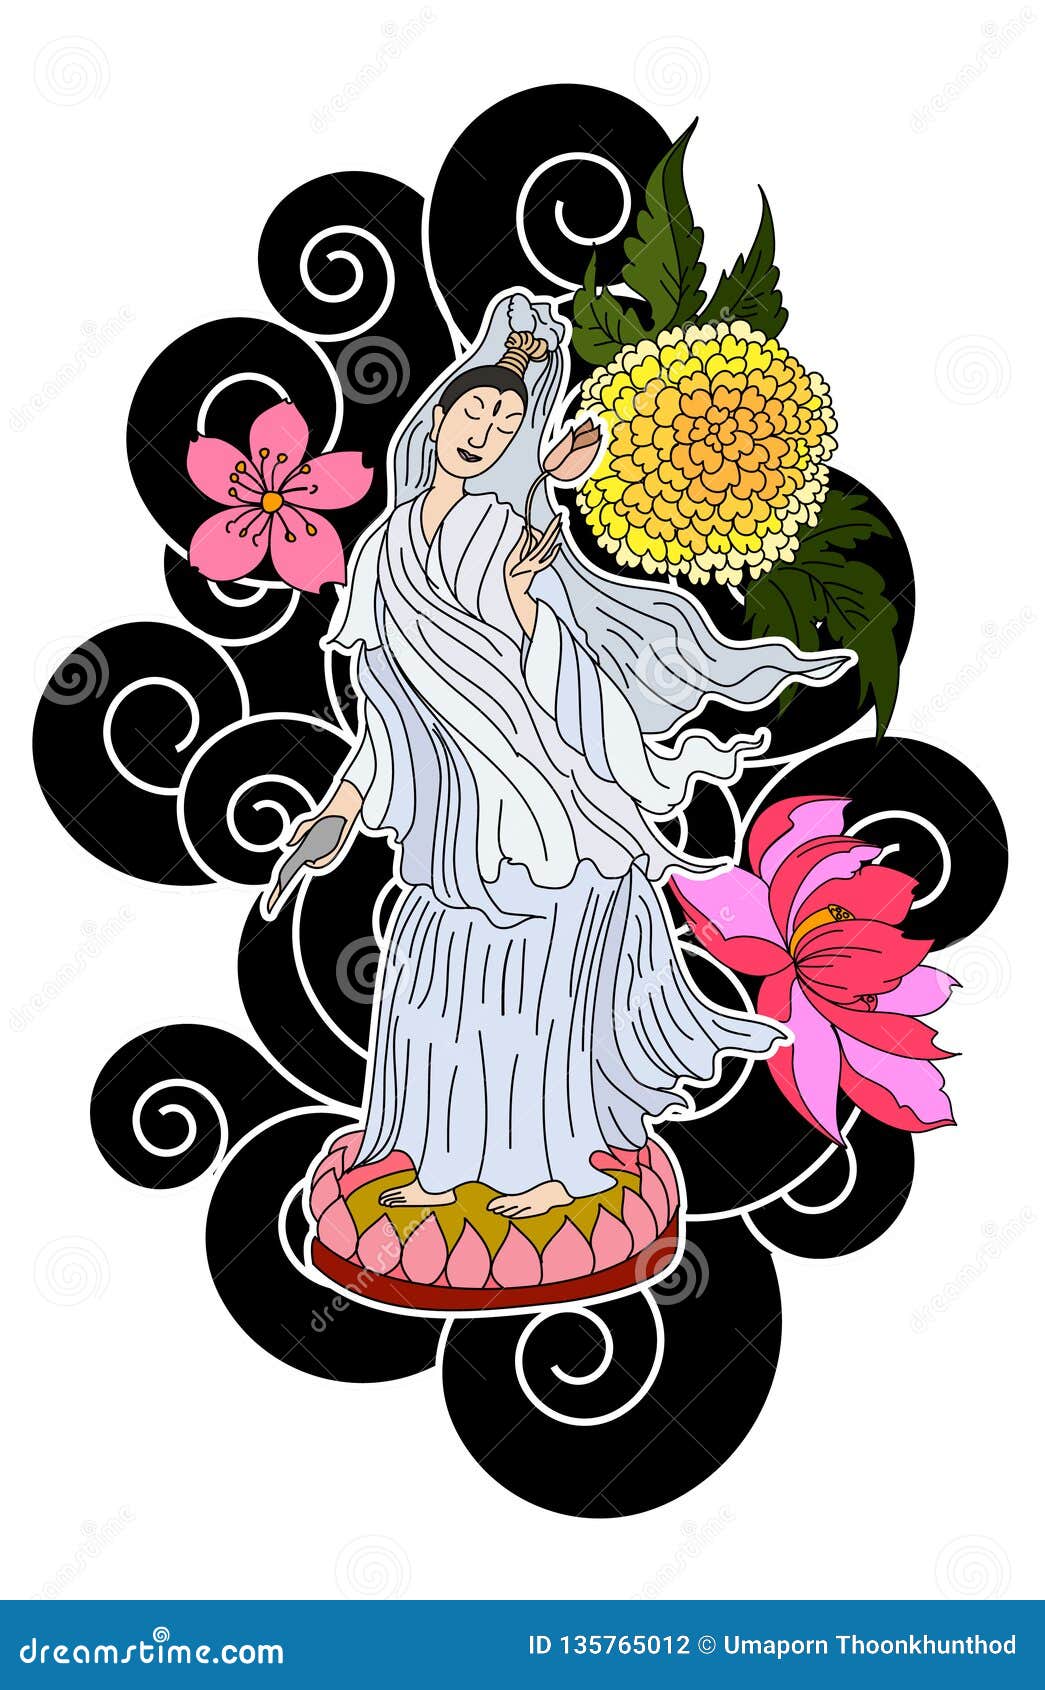 Guan Yin Women God Of Buddhism With Cherry Blossom Design For Traditional Tattoo Stock Vector Illustration Of Brossom Cherry